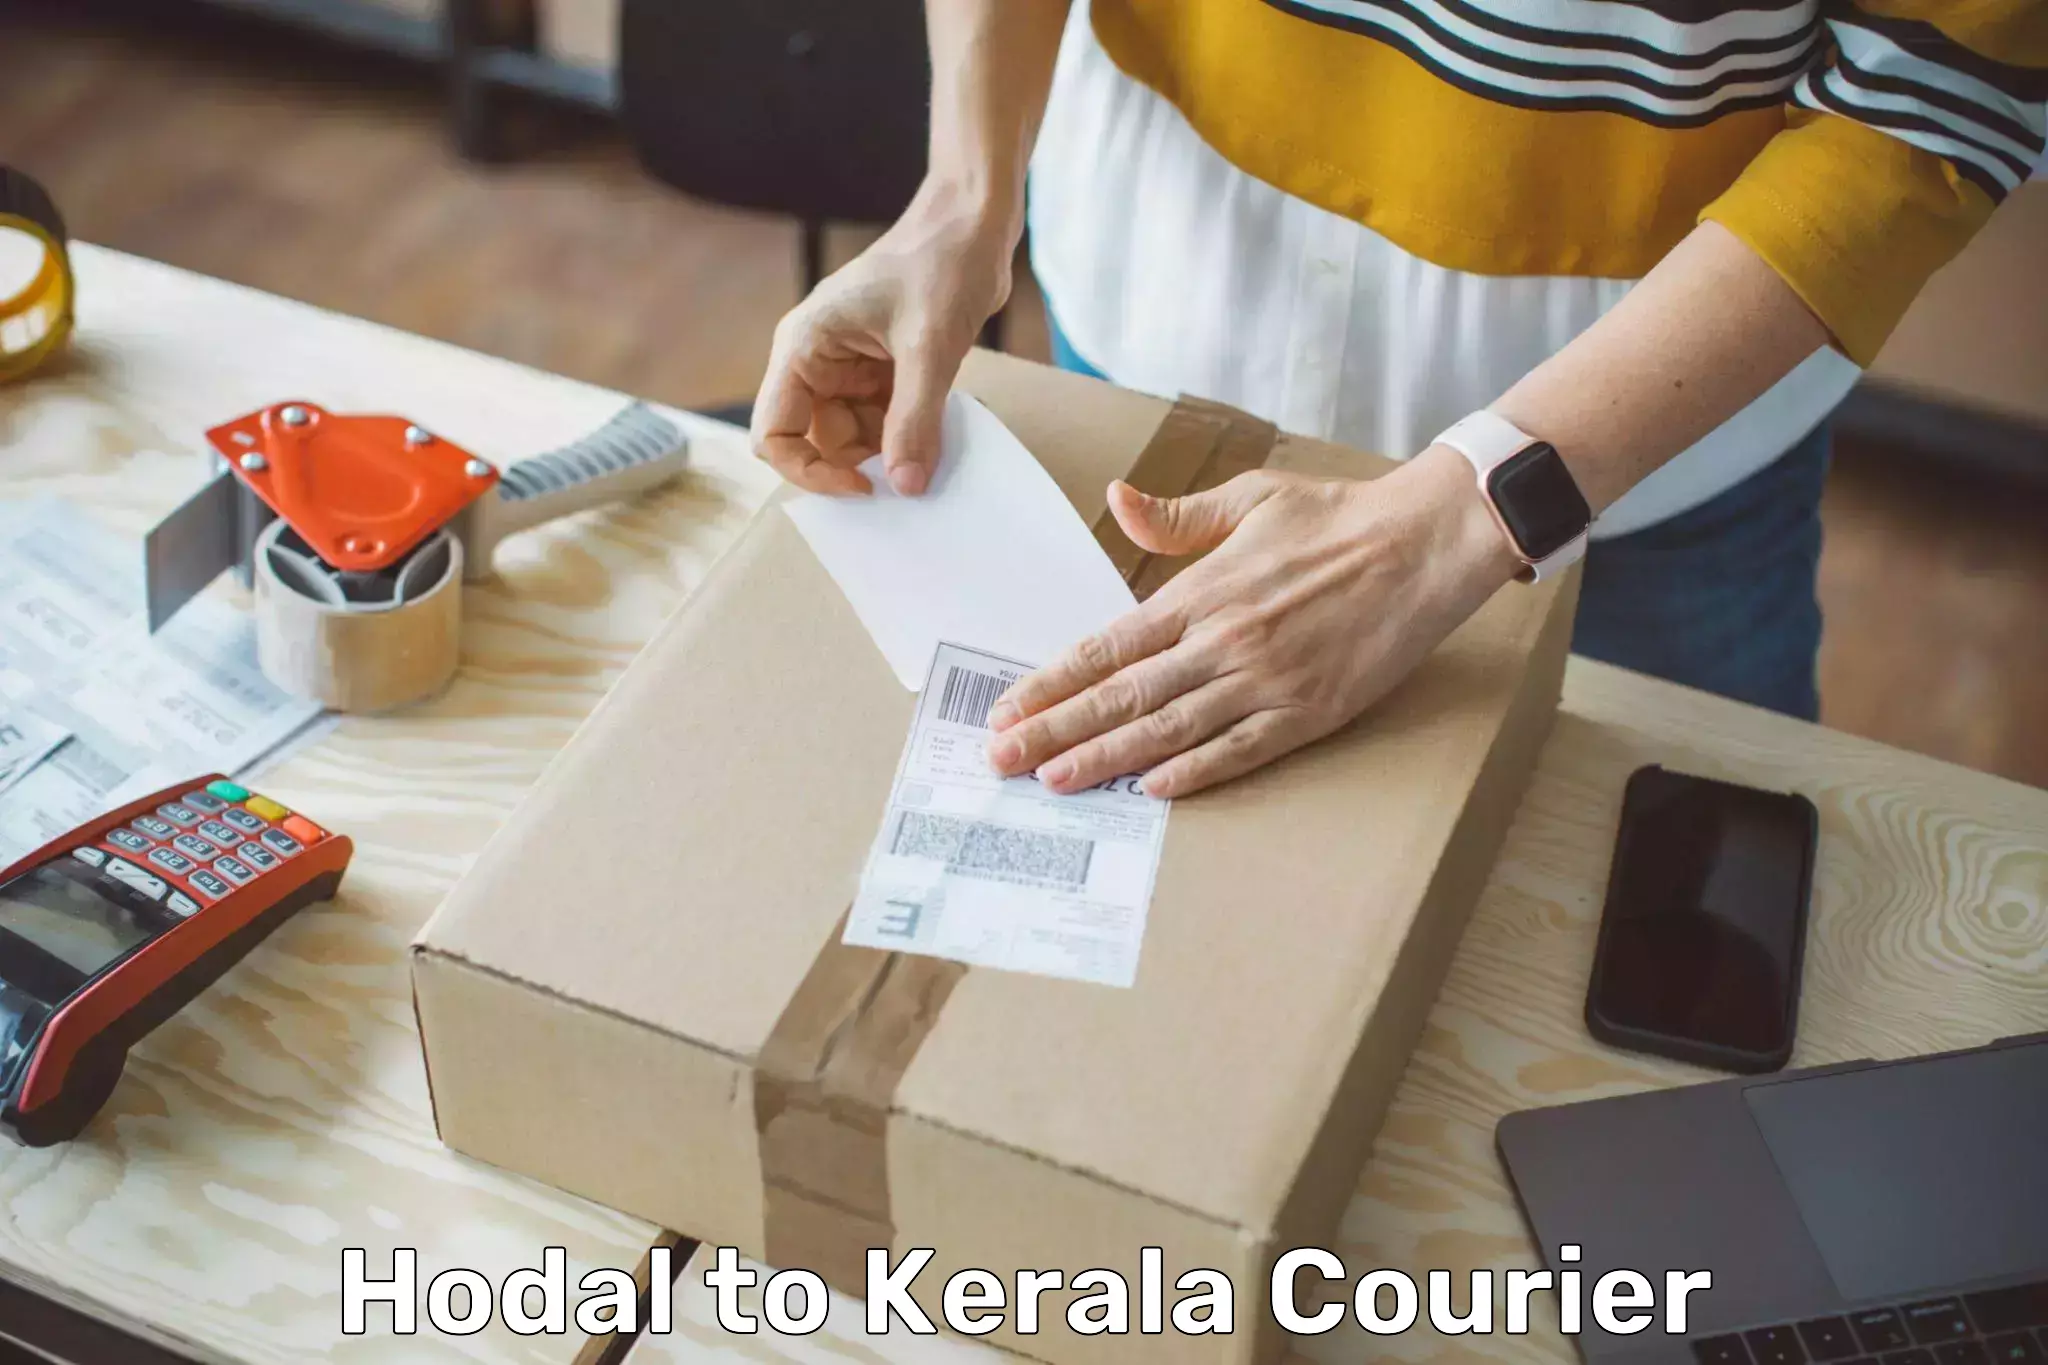 Online package tracking Hodal to Kerala